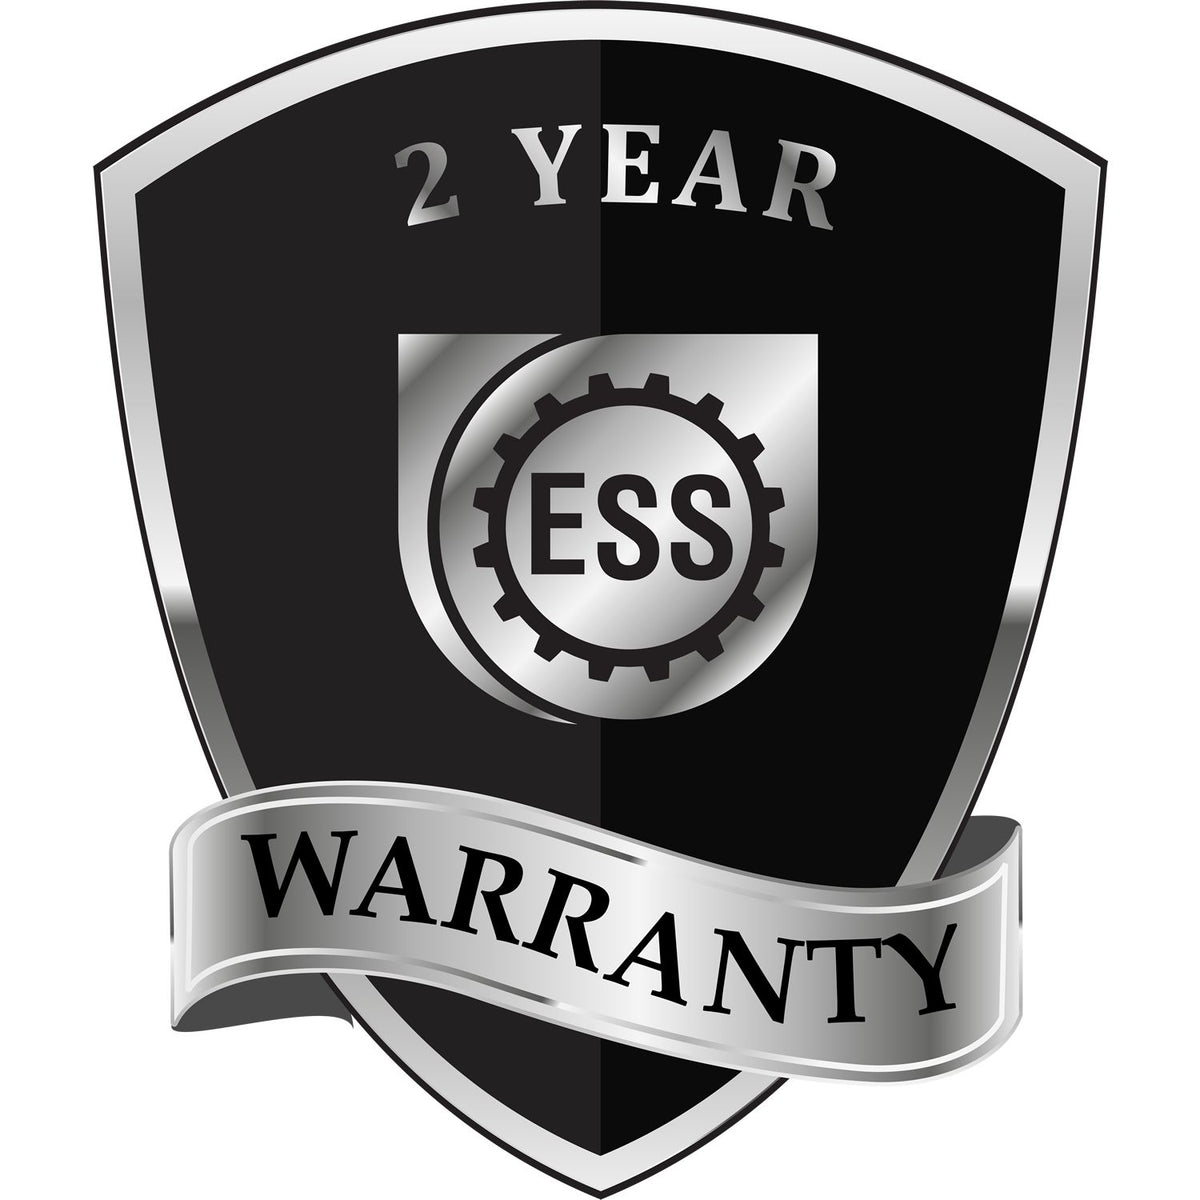 A black and silver badge or emblem showing warranty information for the Handheld New York Professional Geologist Embosser